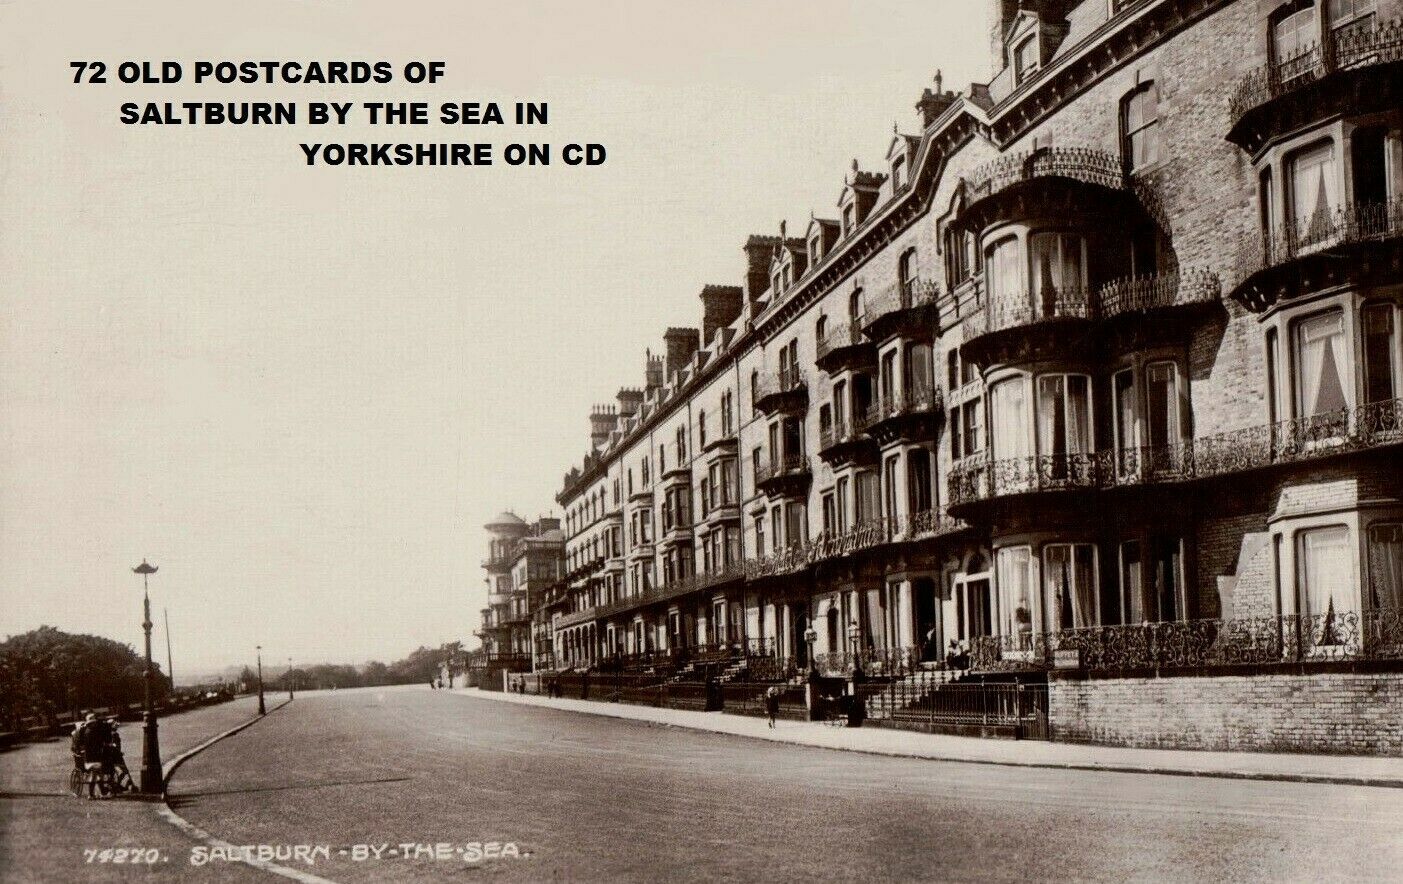 House Clearance - 72 OLD VINTAGE POSTCARDS OF SALTBURN BY THE SEA IN YORKSHIRE ON CD